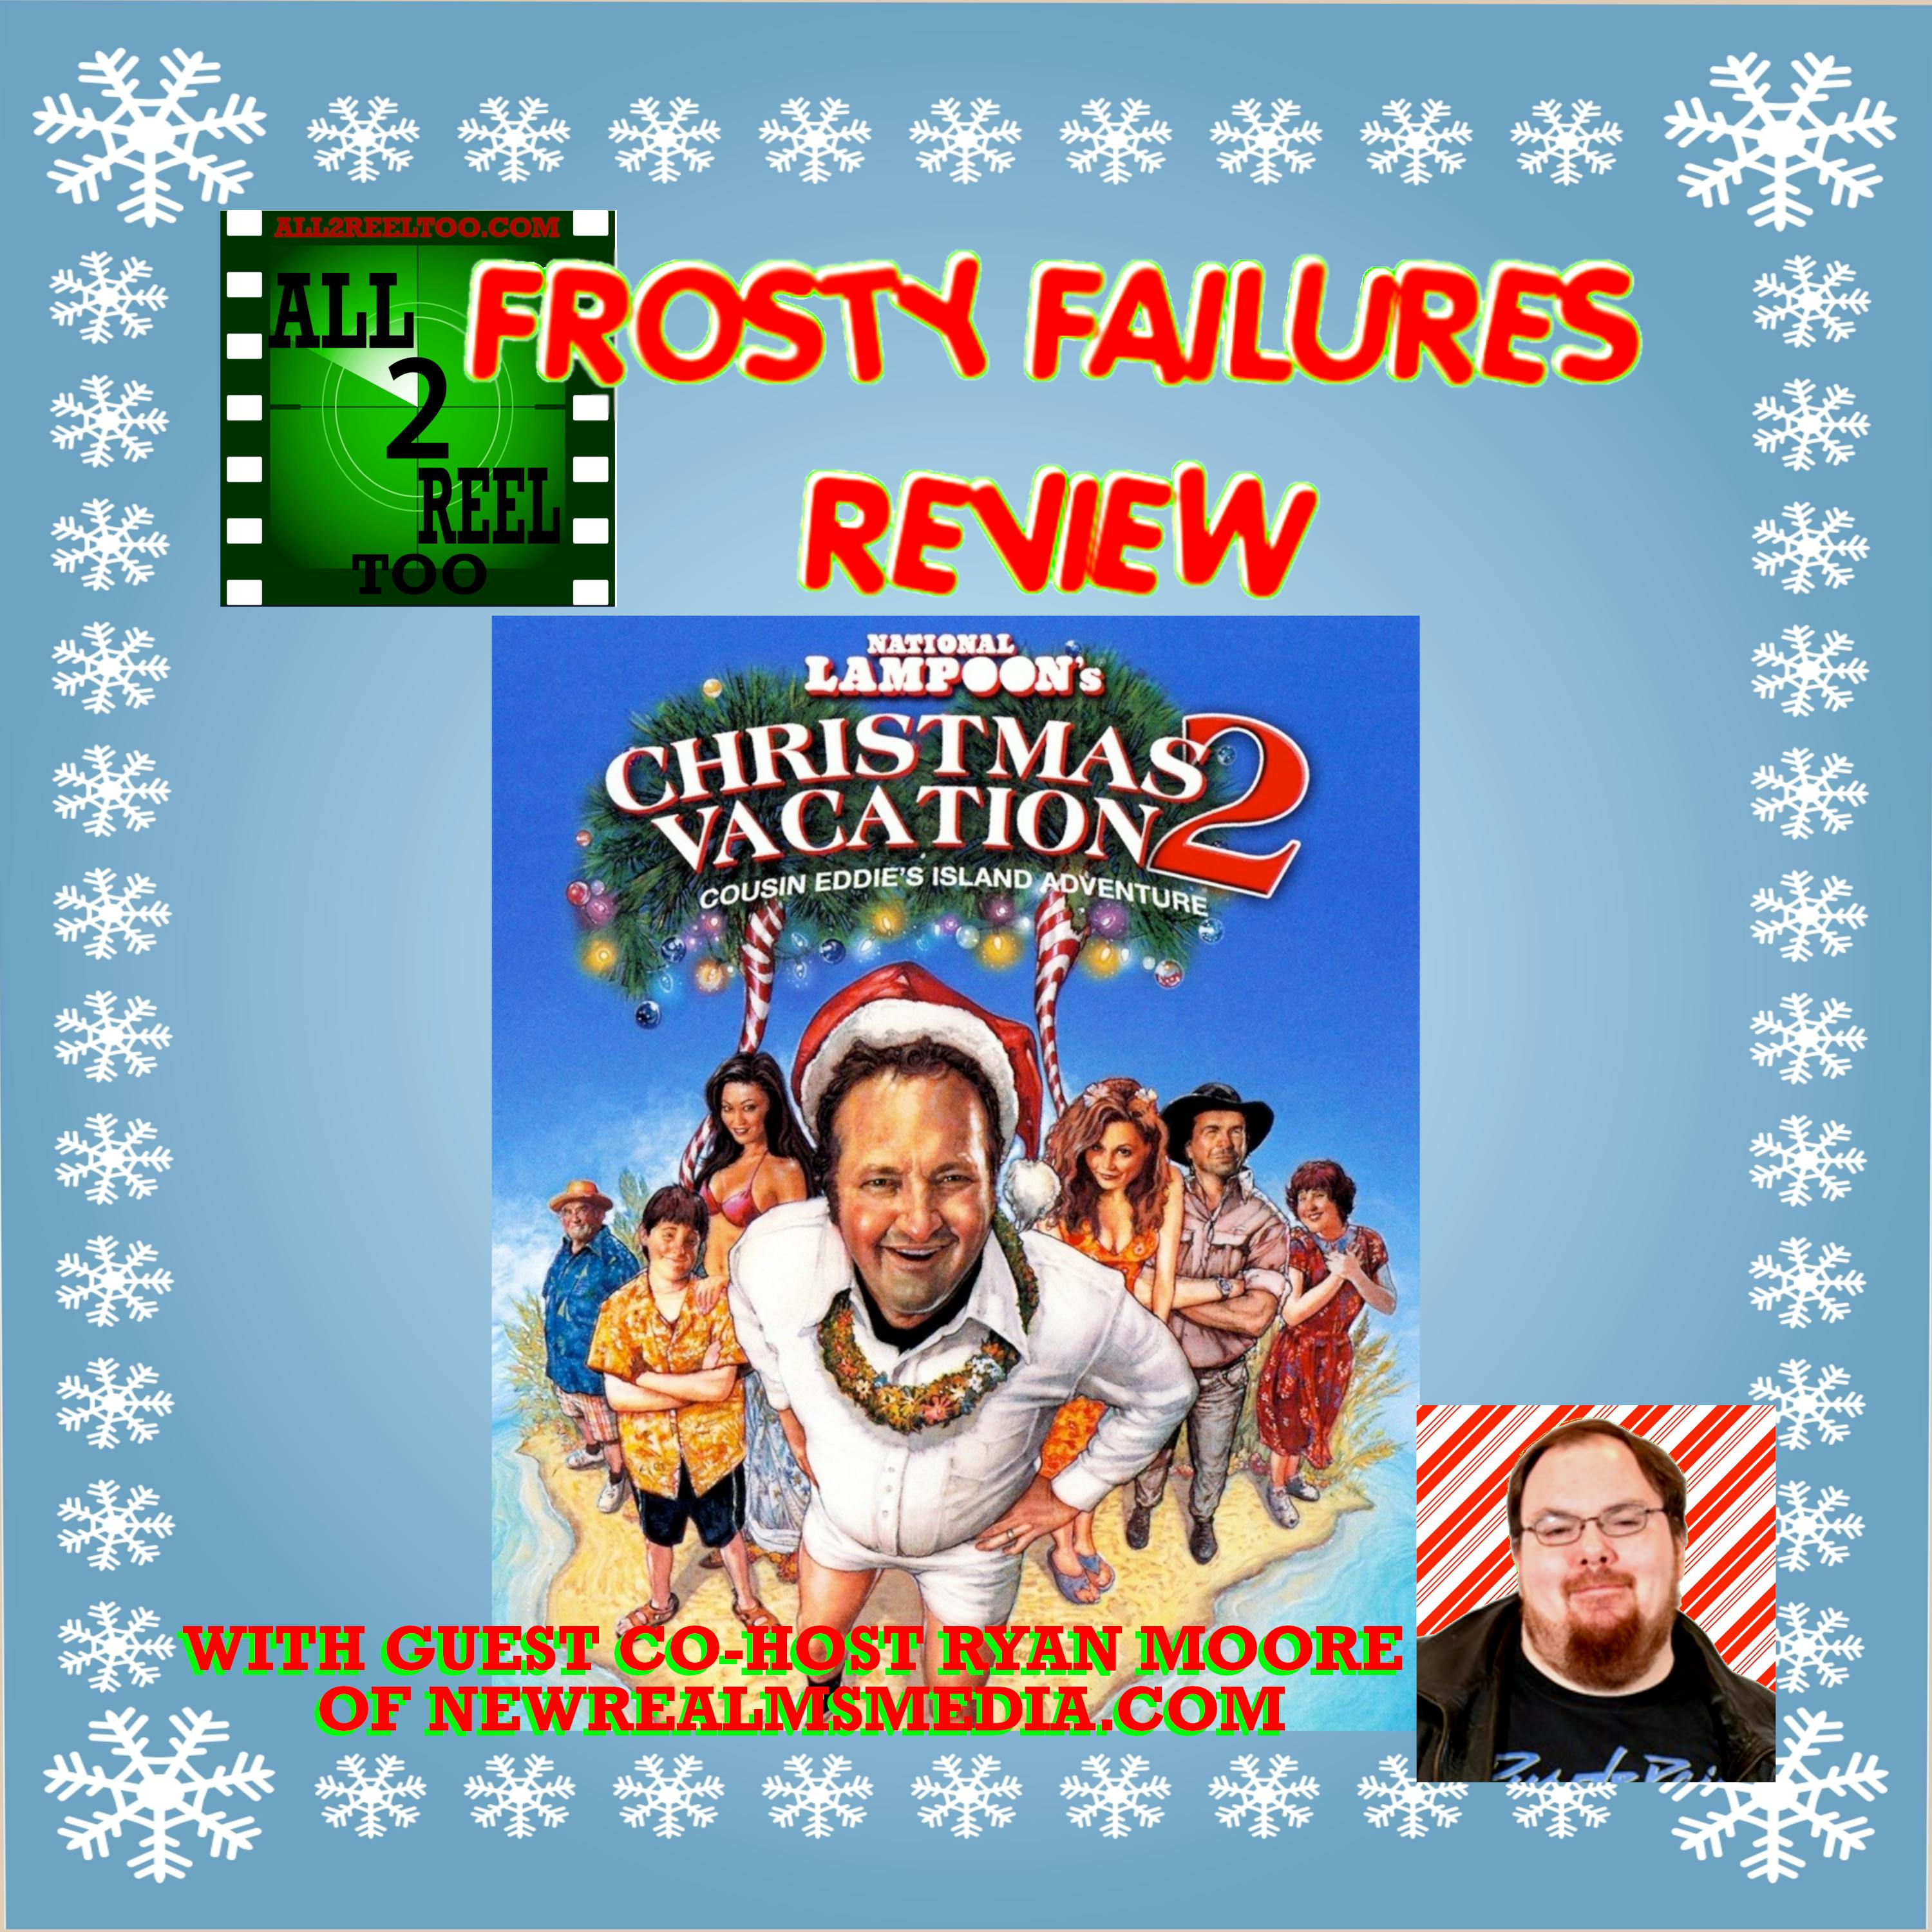 National Lampoon's Christmas Vacation 2: Cousin Eddie's Island Adventure (2003)  - FROSTY FAILURES REVIEW